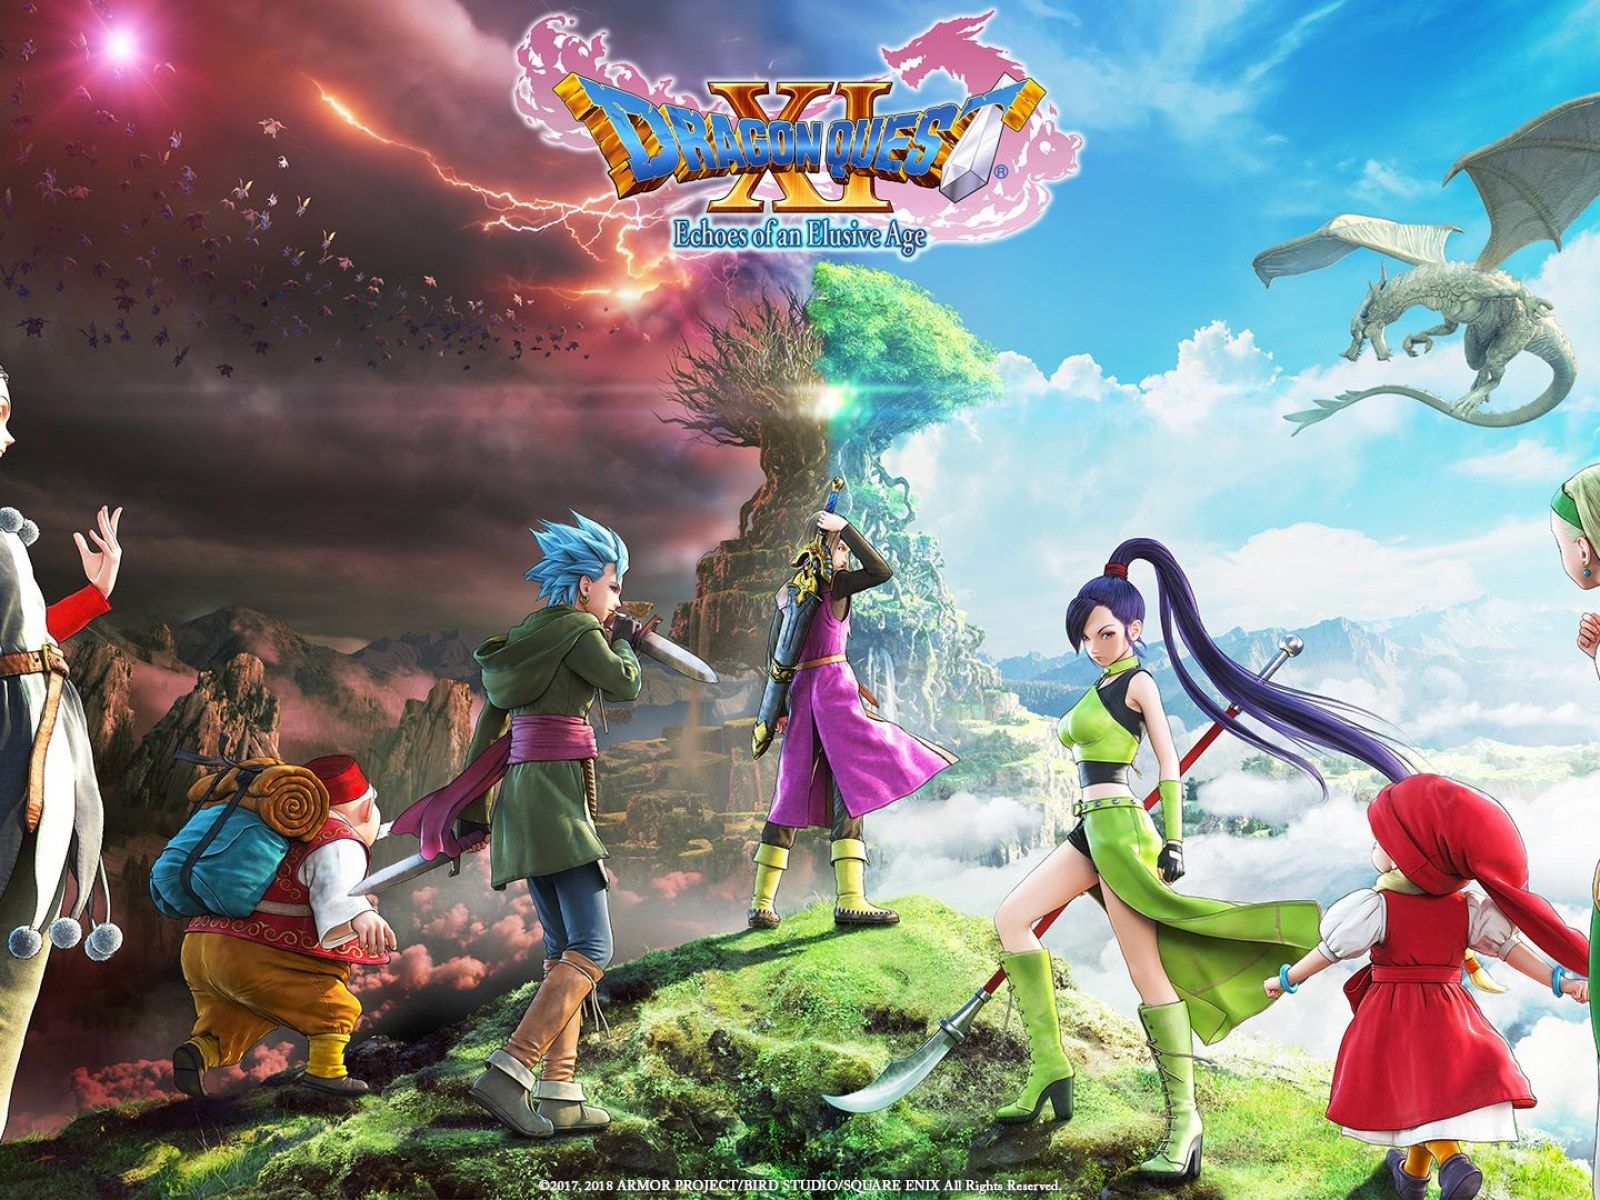 Dragon Quest XI' Post Game Guide: How To Strengthen Your Party For The Ultimate Challenge